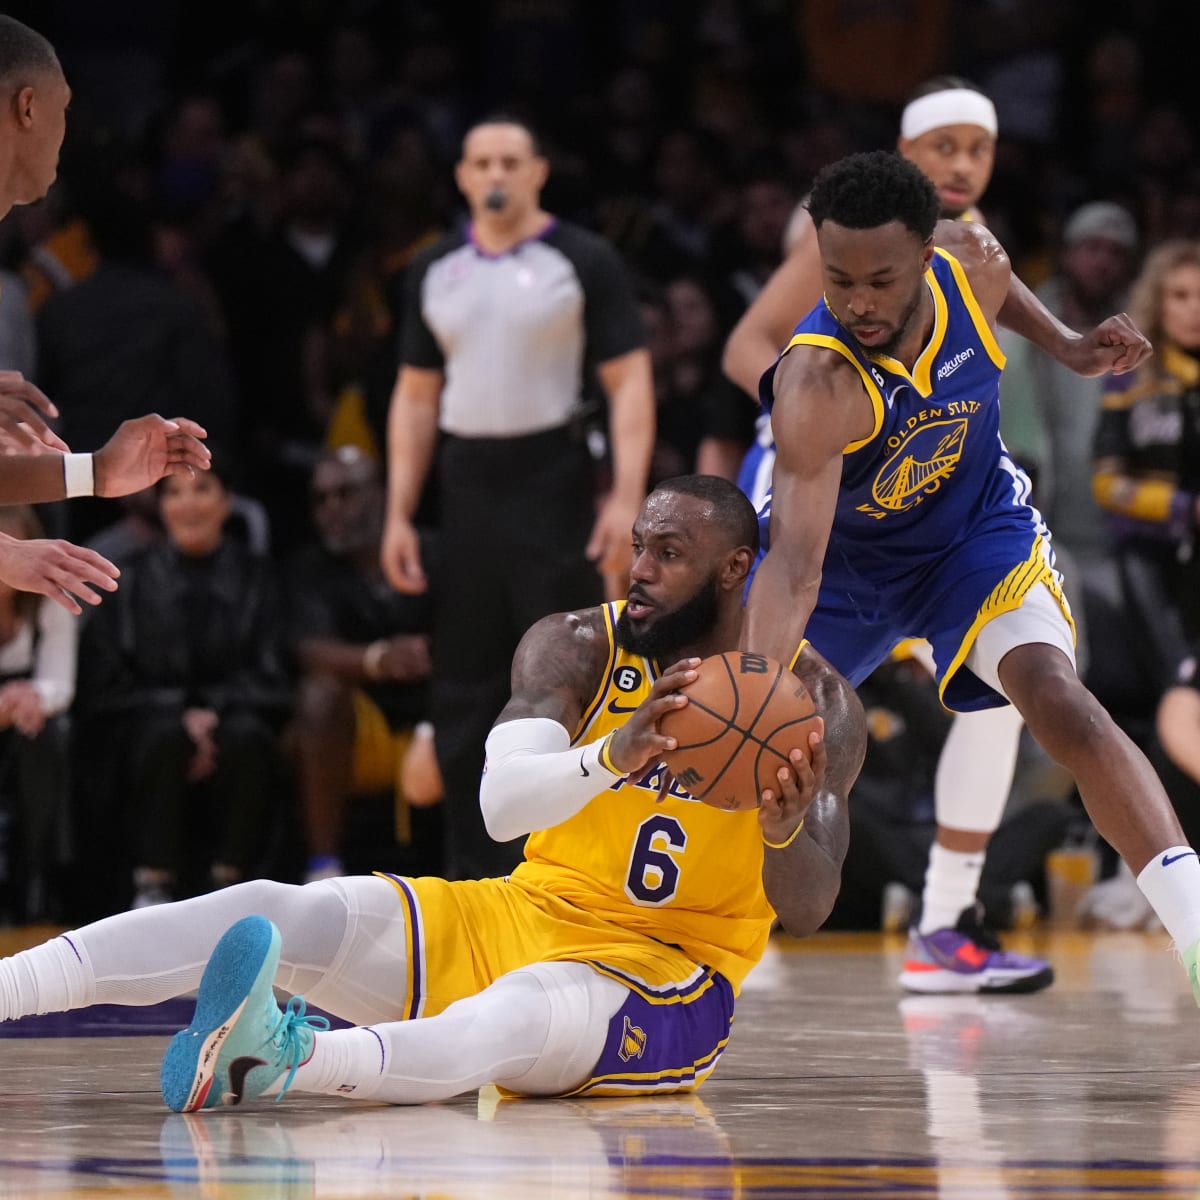 Stephen Curry NBA Playoffs Player Props: Warriors vs. Lakers